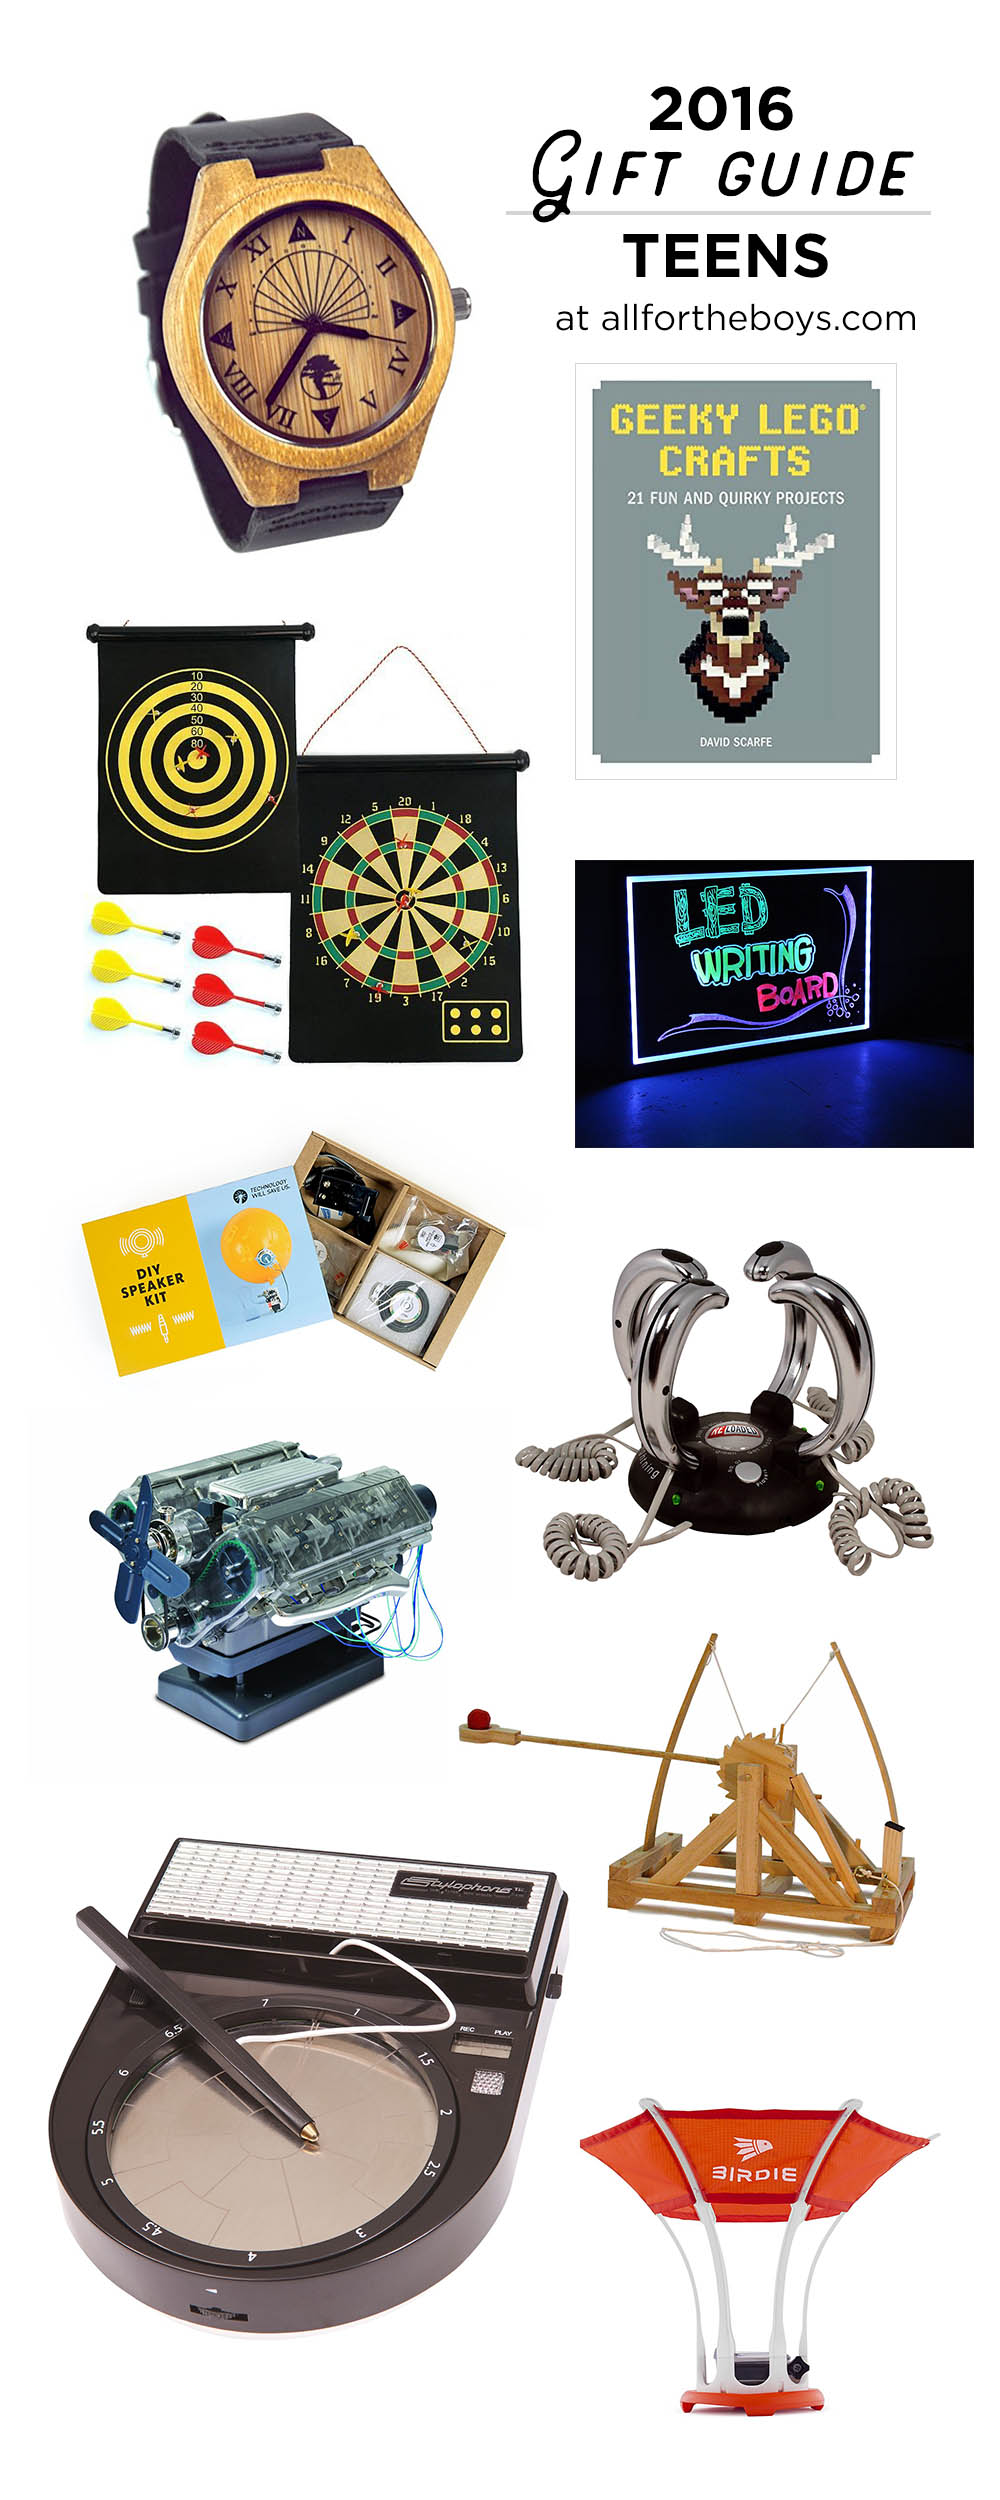 2016 Gift Guide for teens